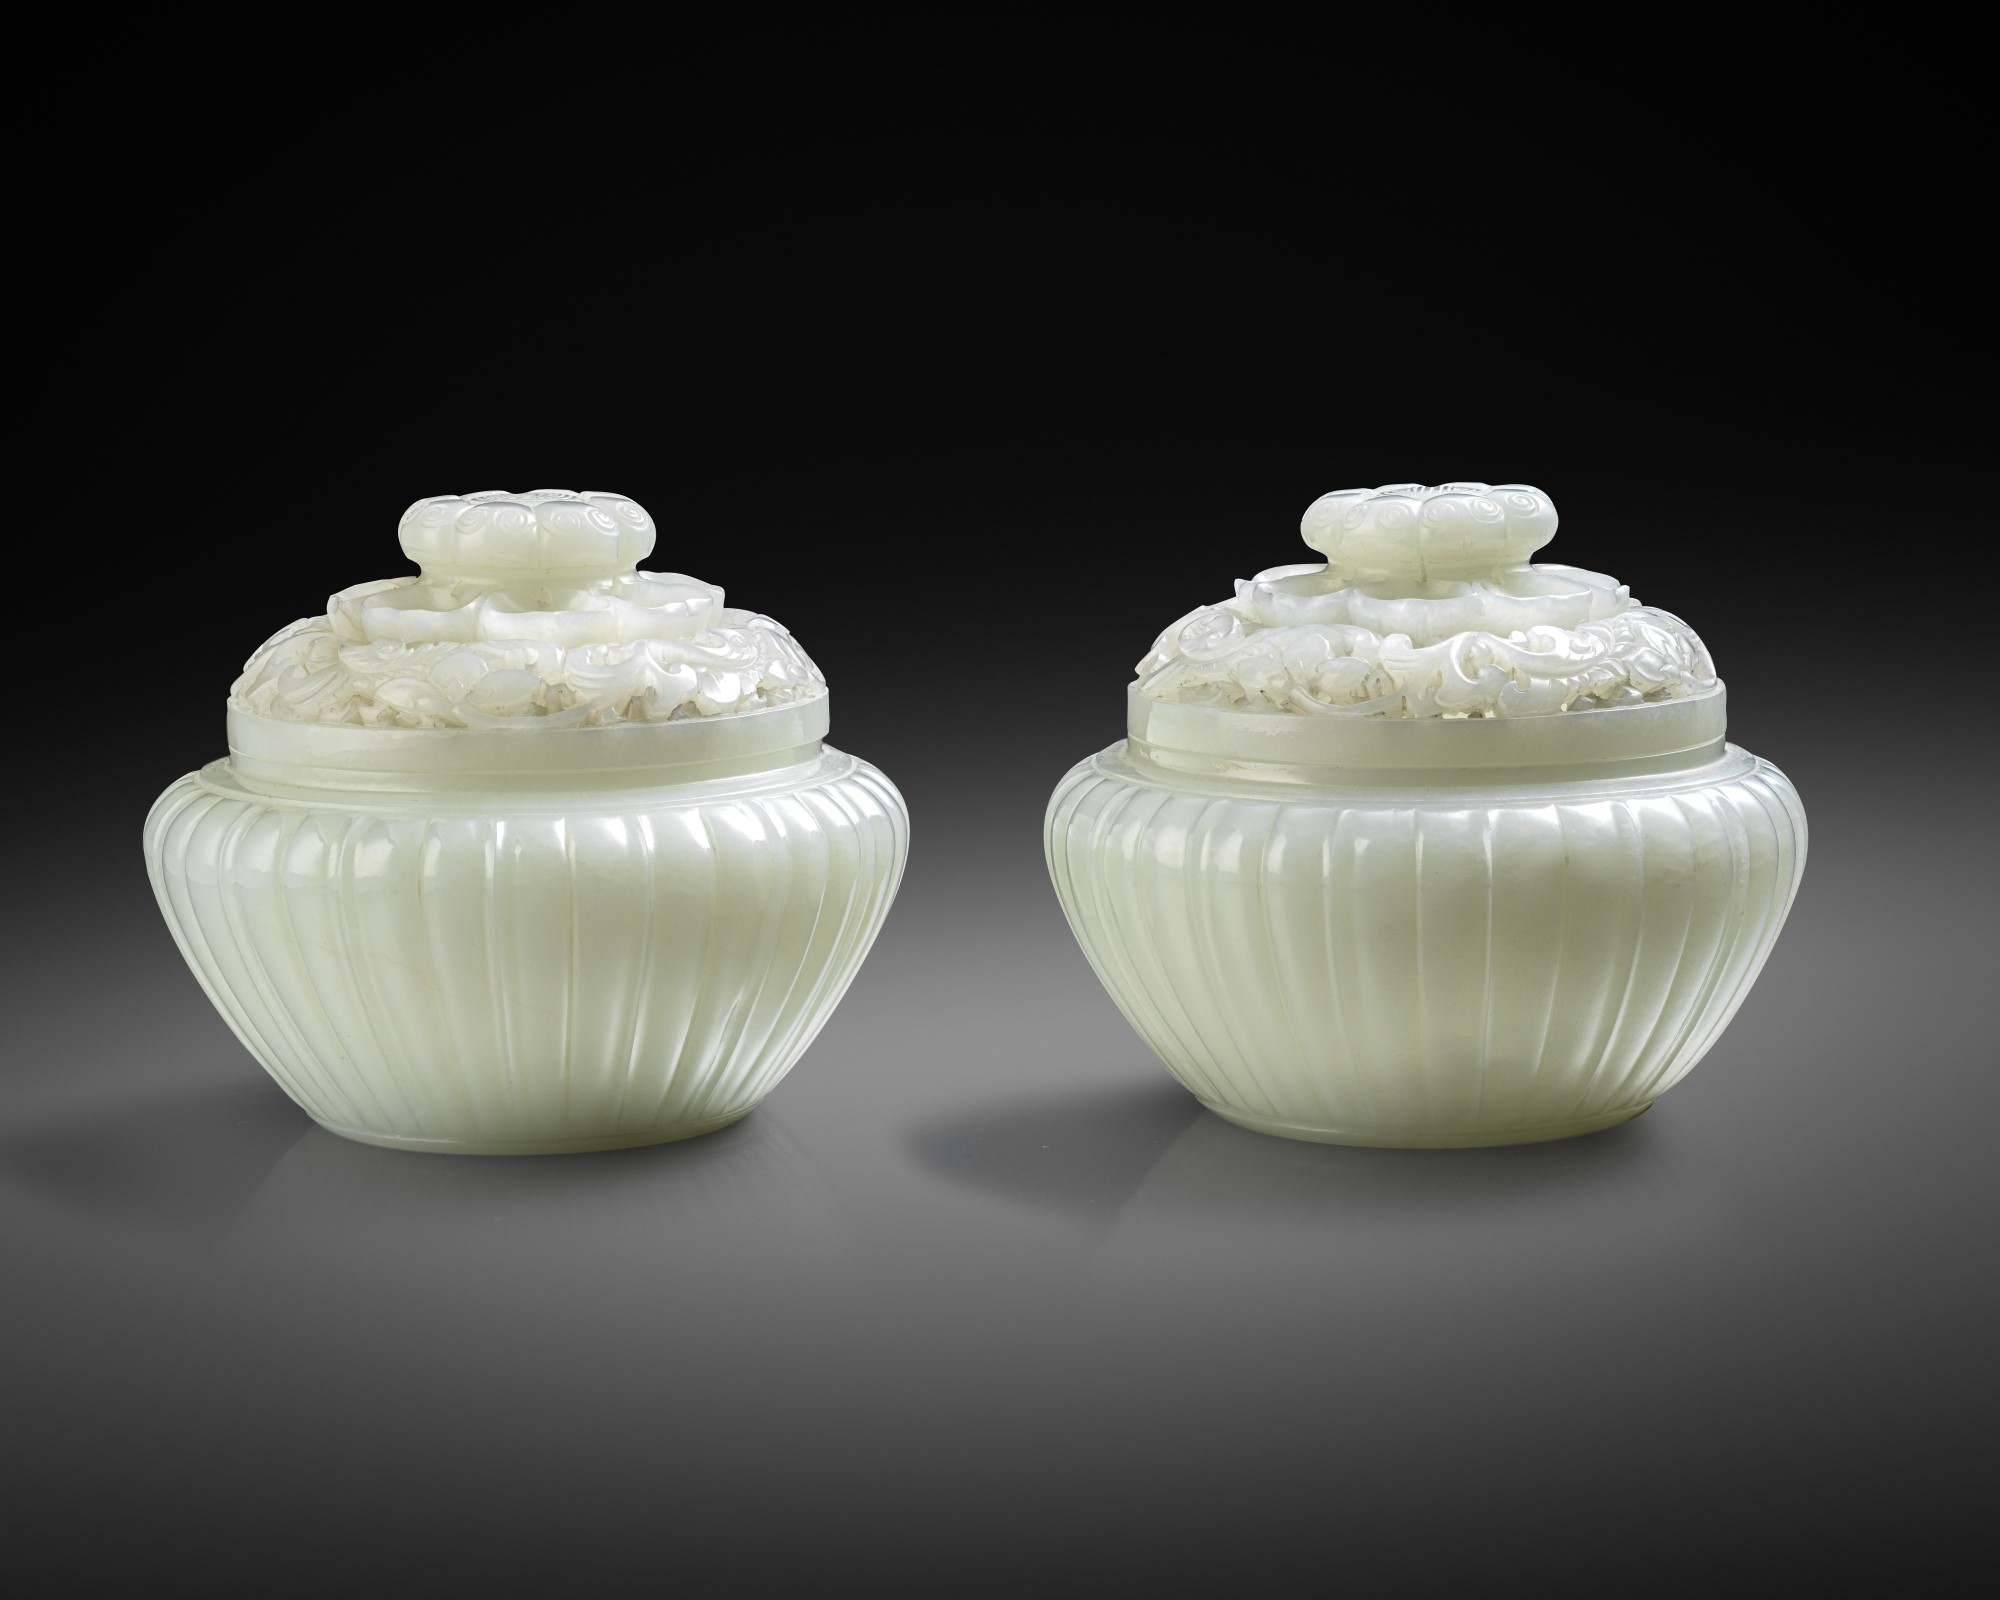 AN EXCEPTIONAL PAIR OF FINE CHINESE IMPERIAL WHITE JADE JARS AND COVERS